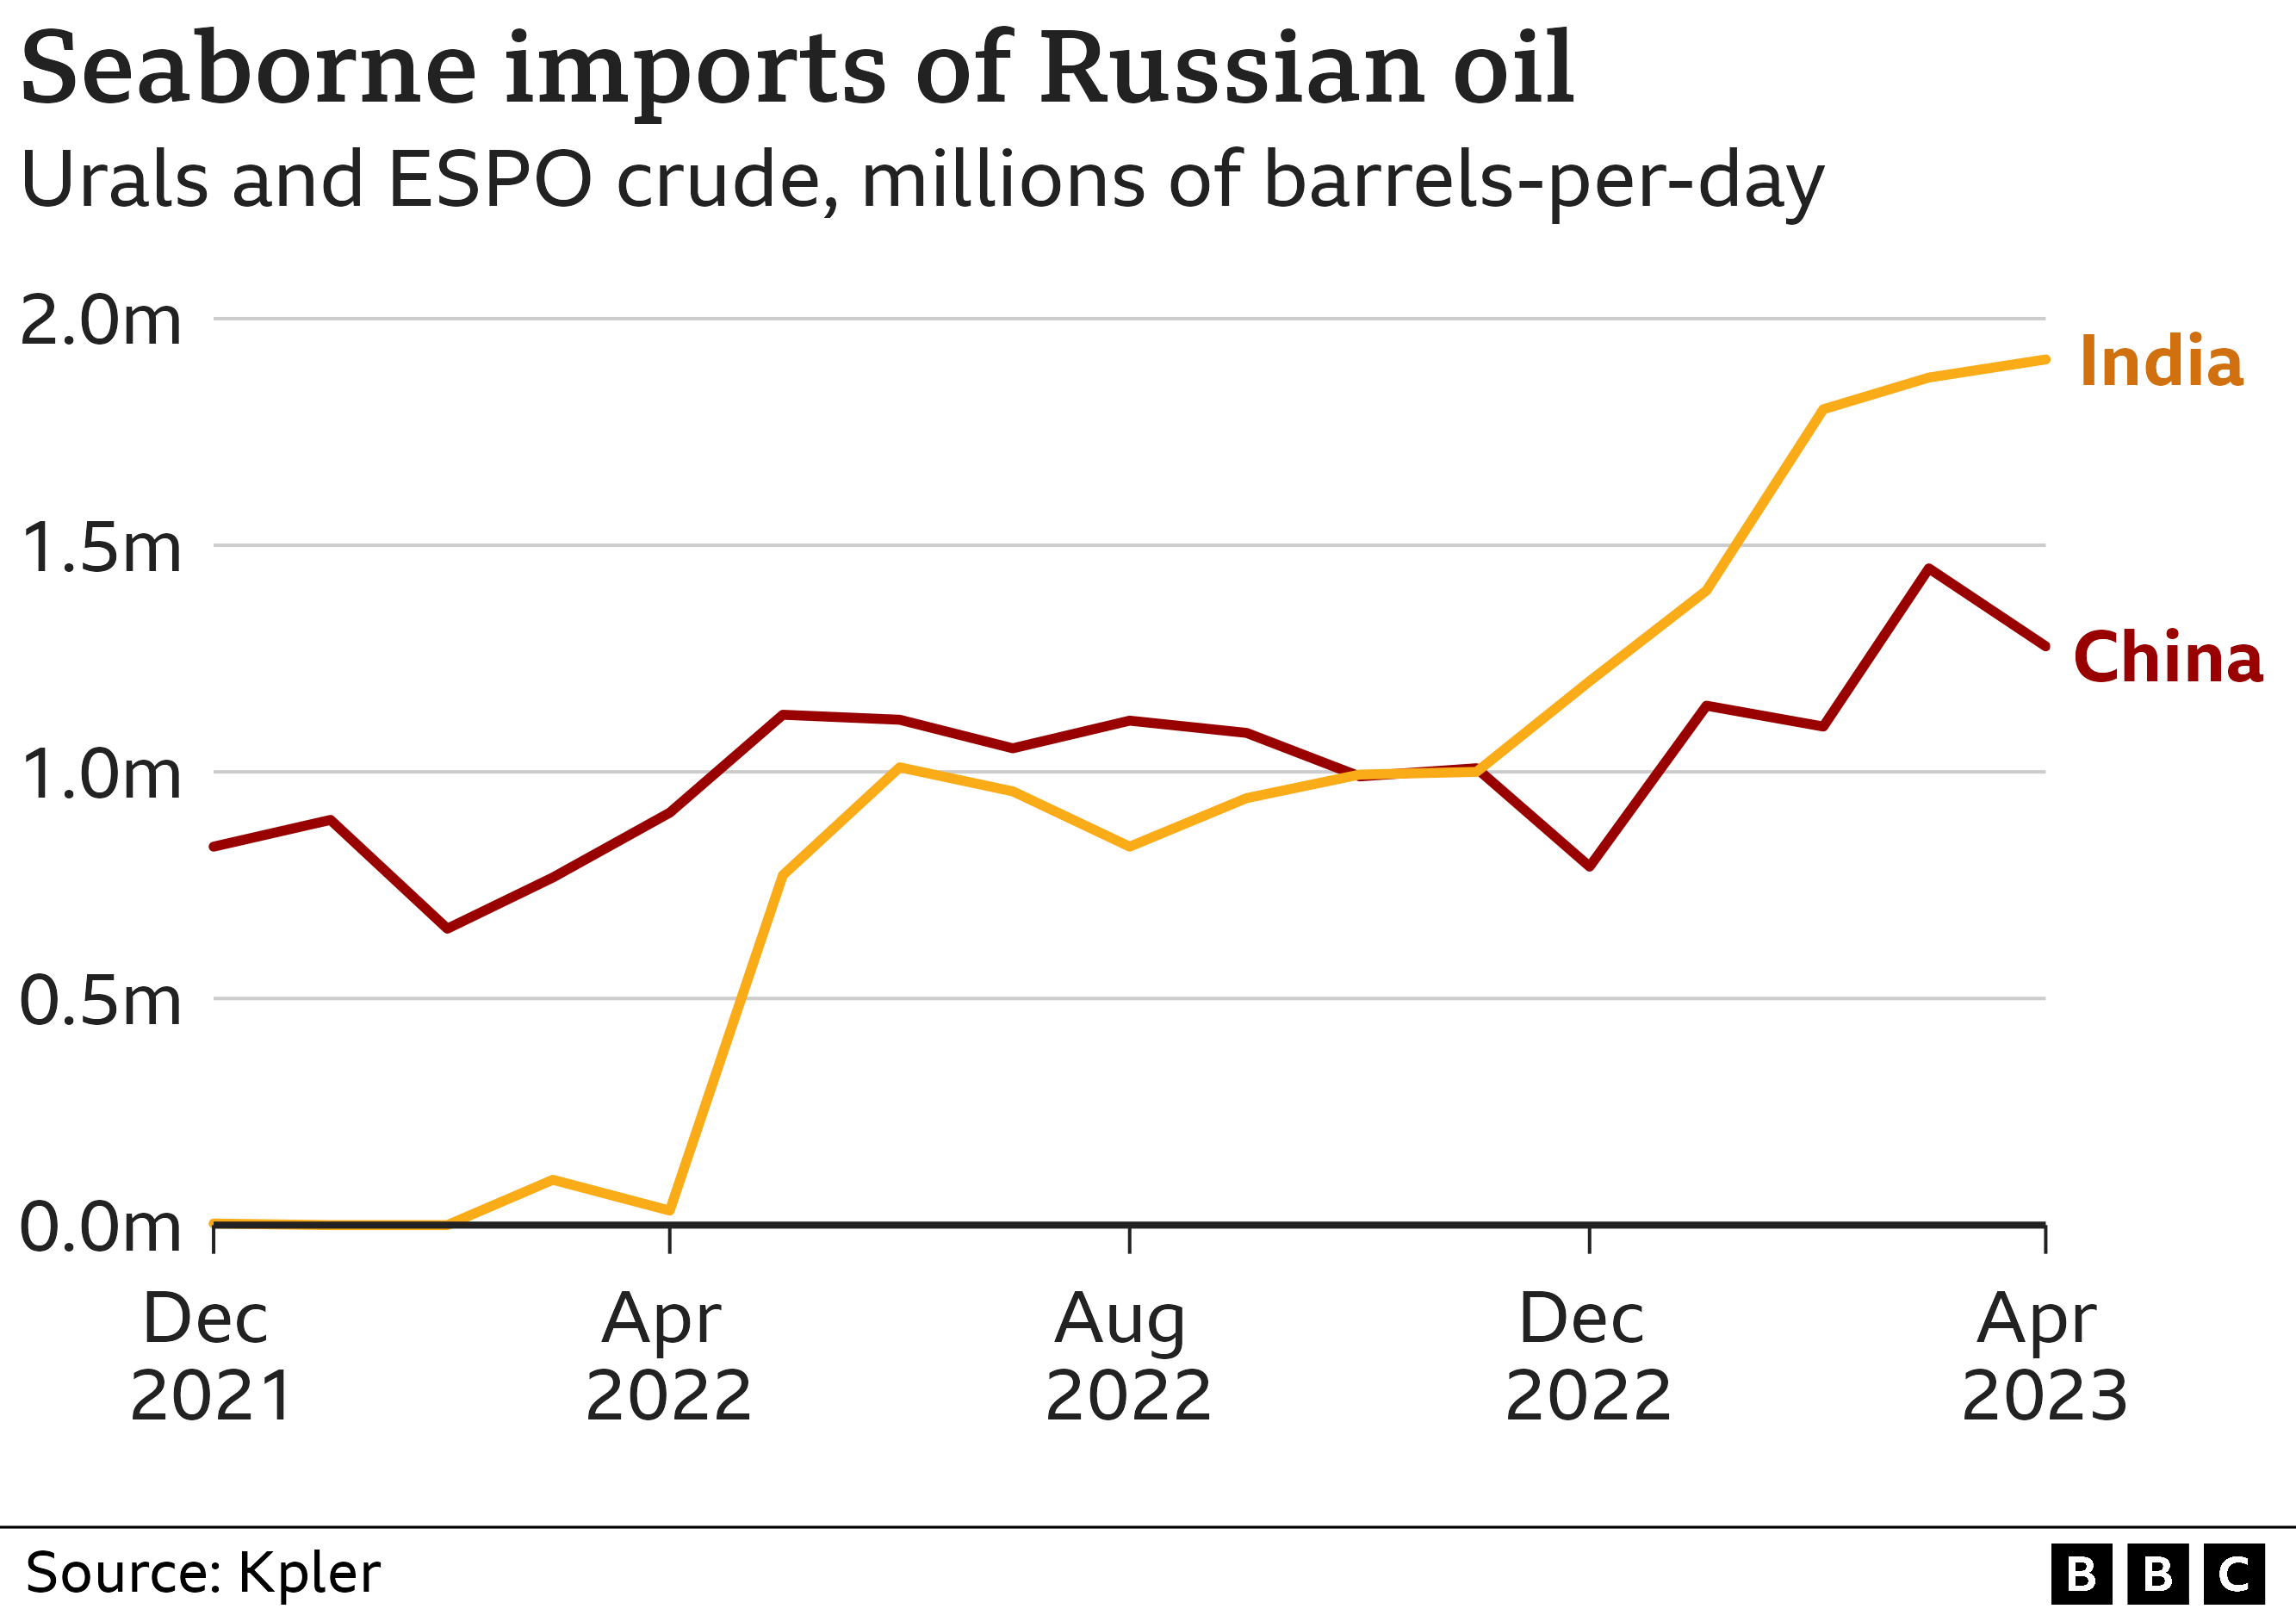 Chart on Russian oil imports by India, China